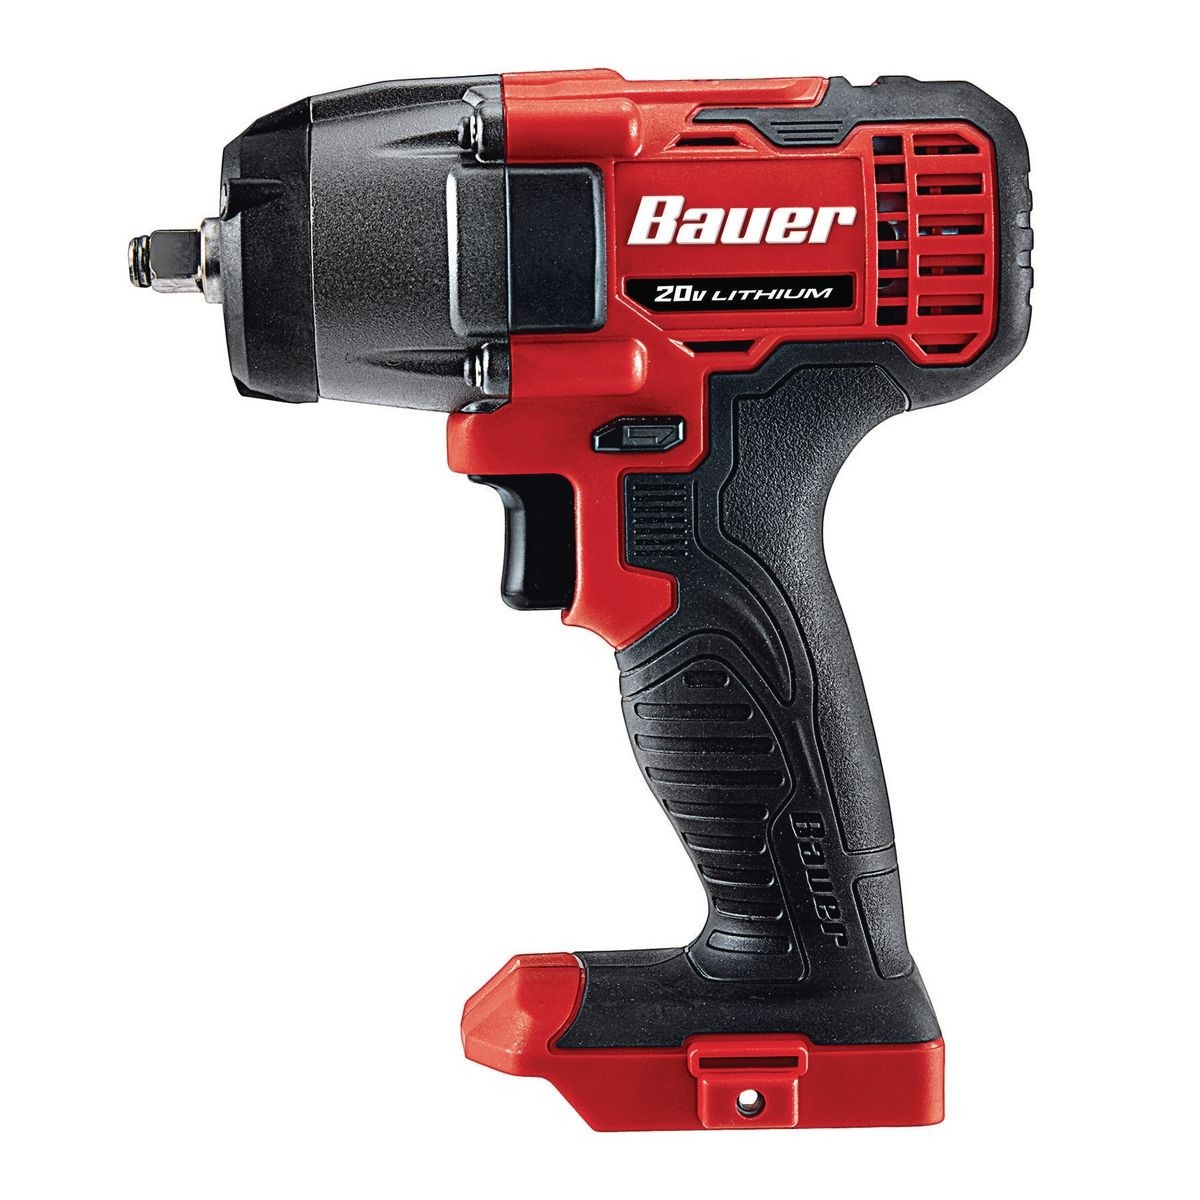 BAUER 20V Hypermax? Lithium 3/8 in. Compact Impact Wrench – Tool Only